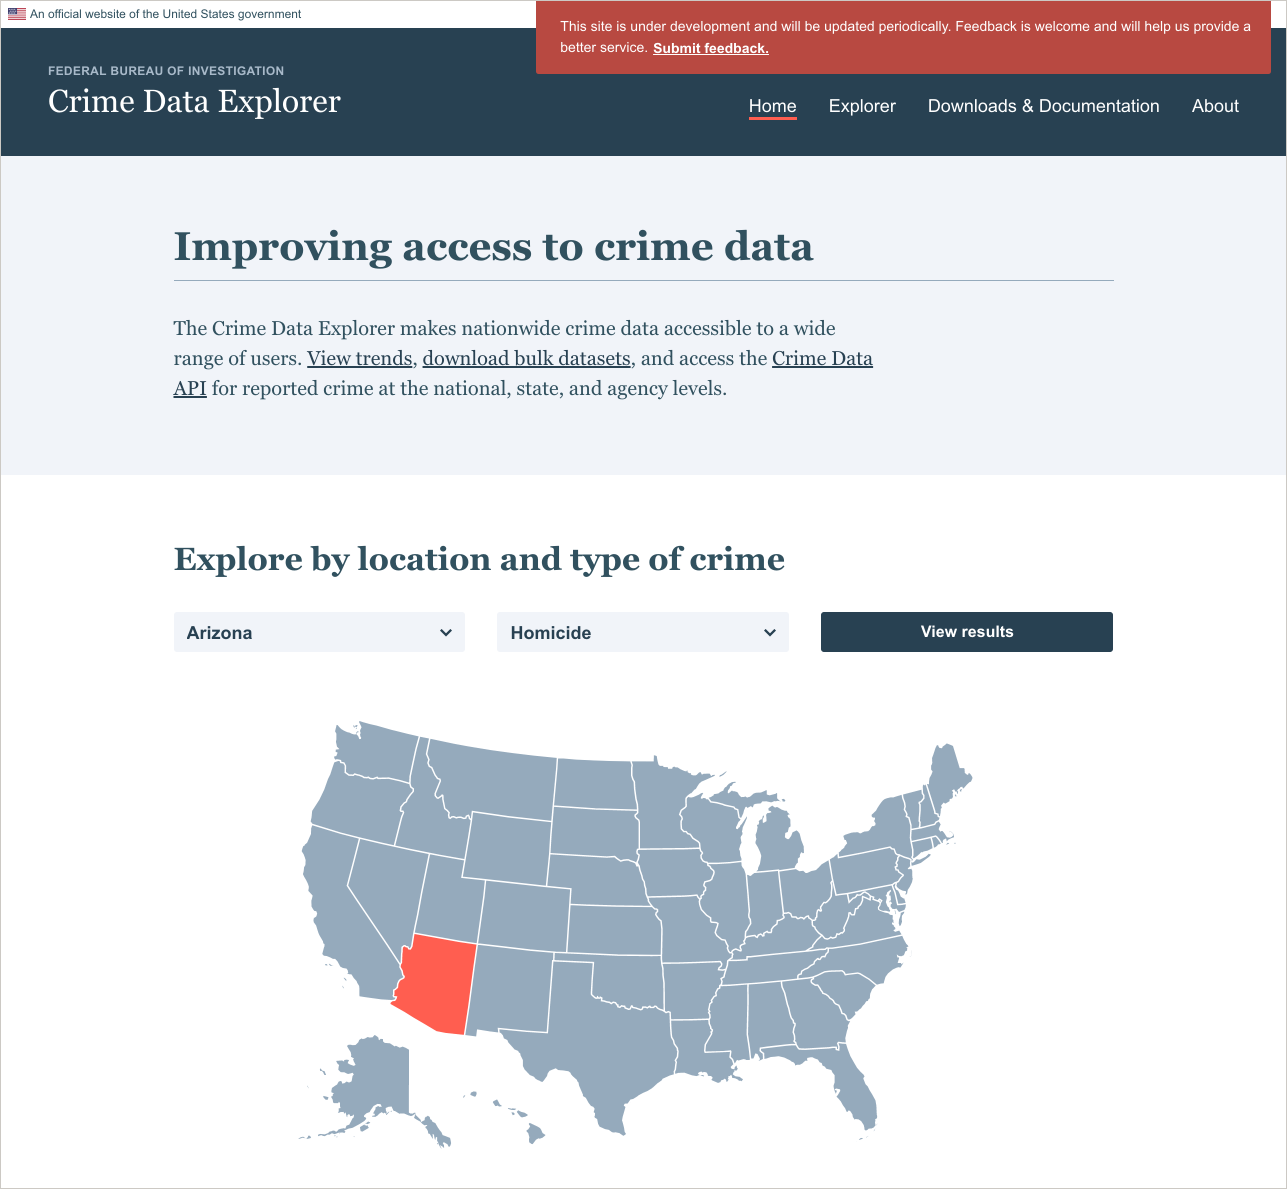 The home page of Crime Data Explorer